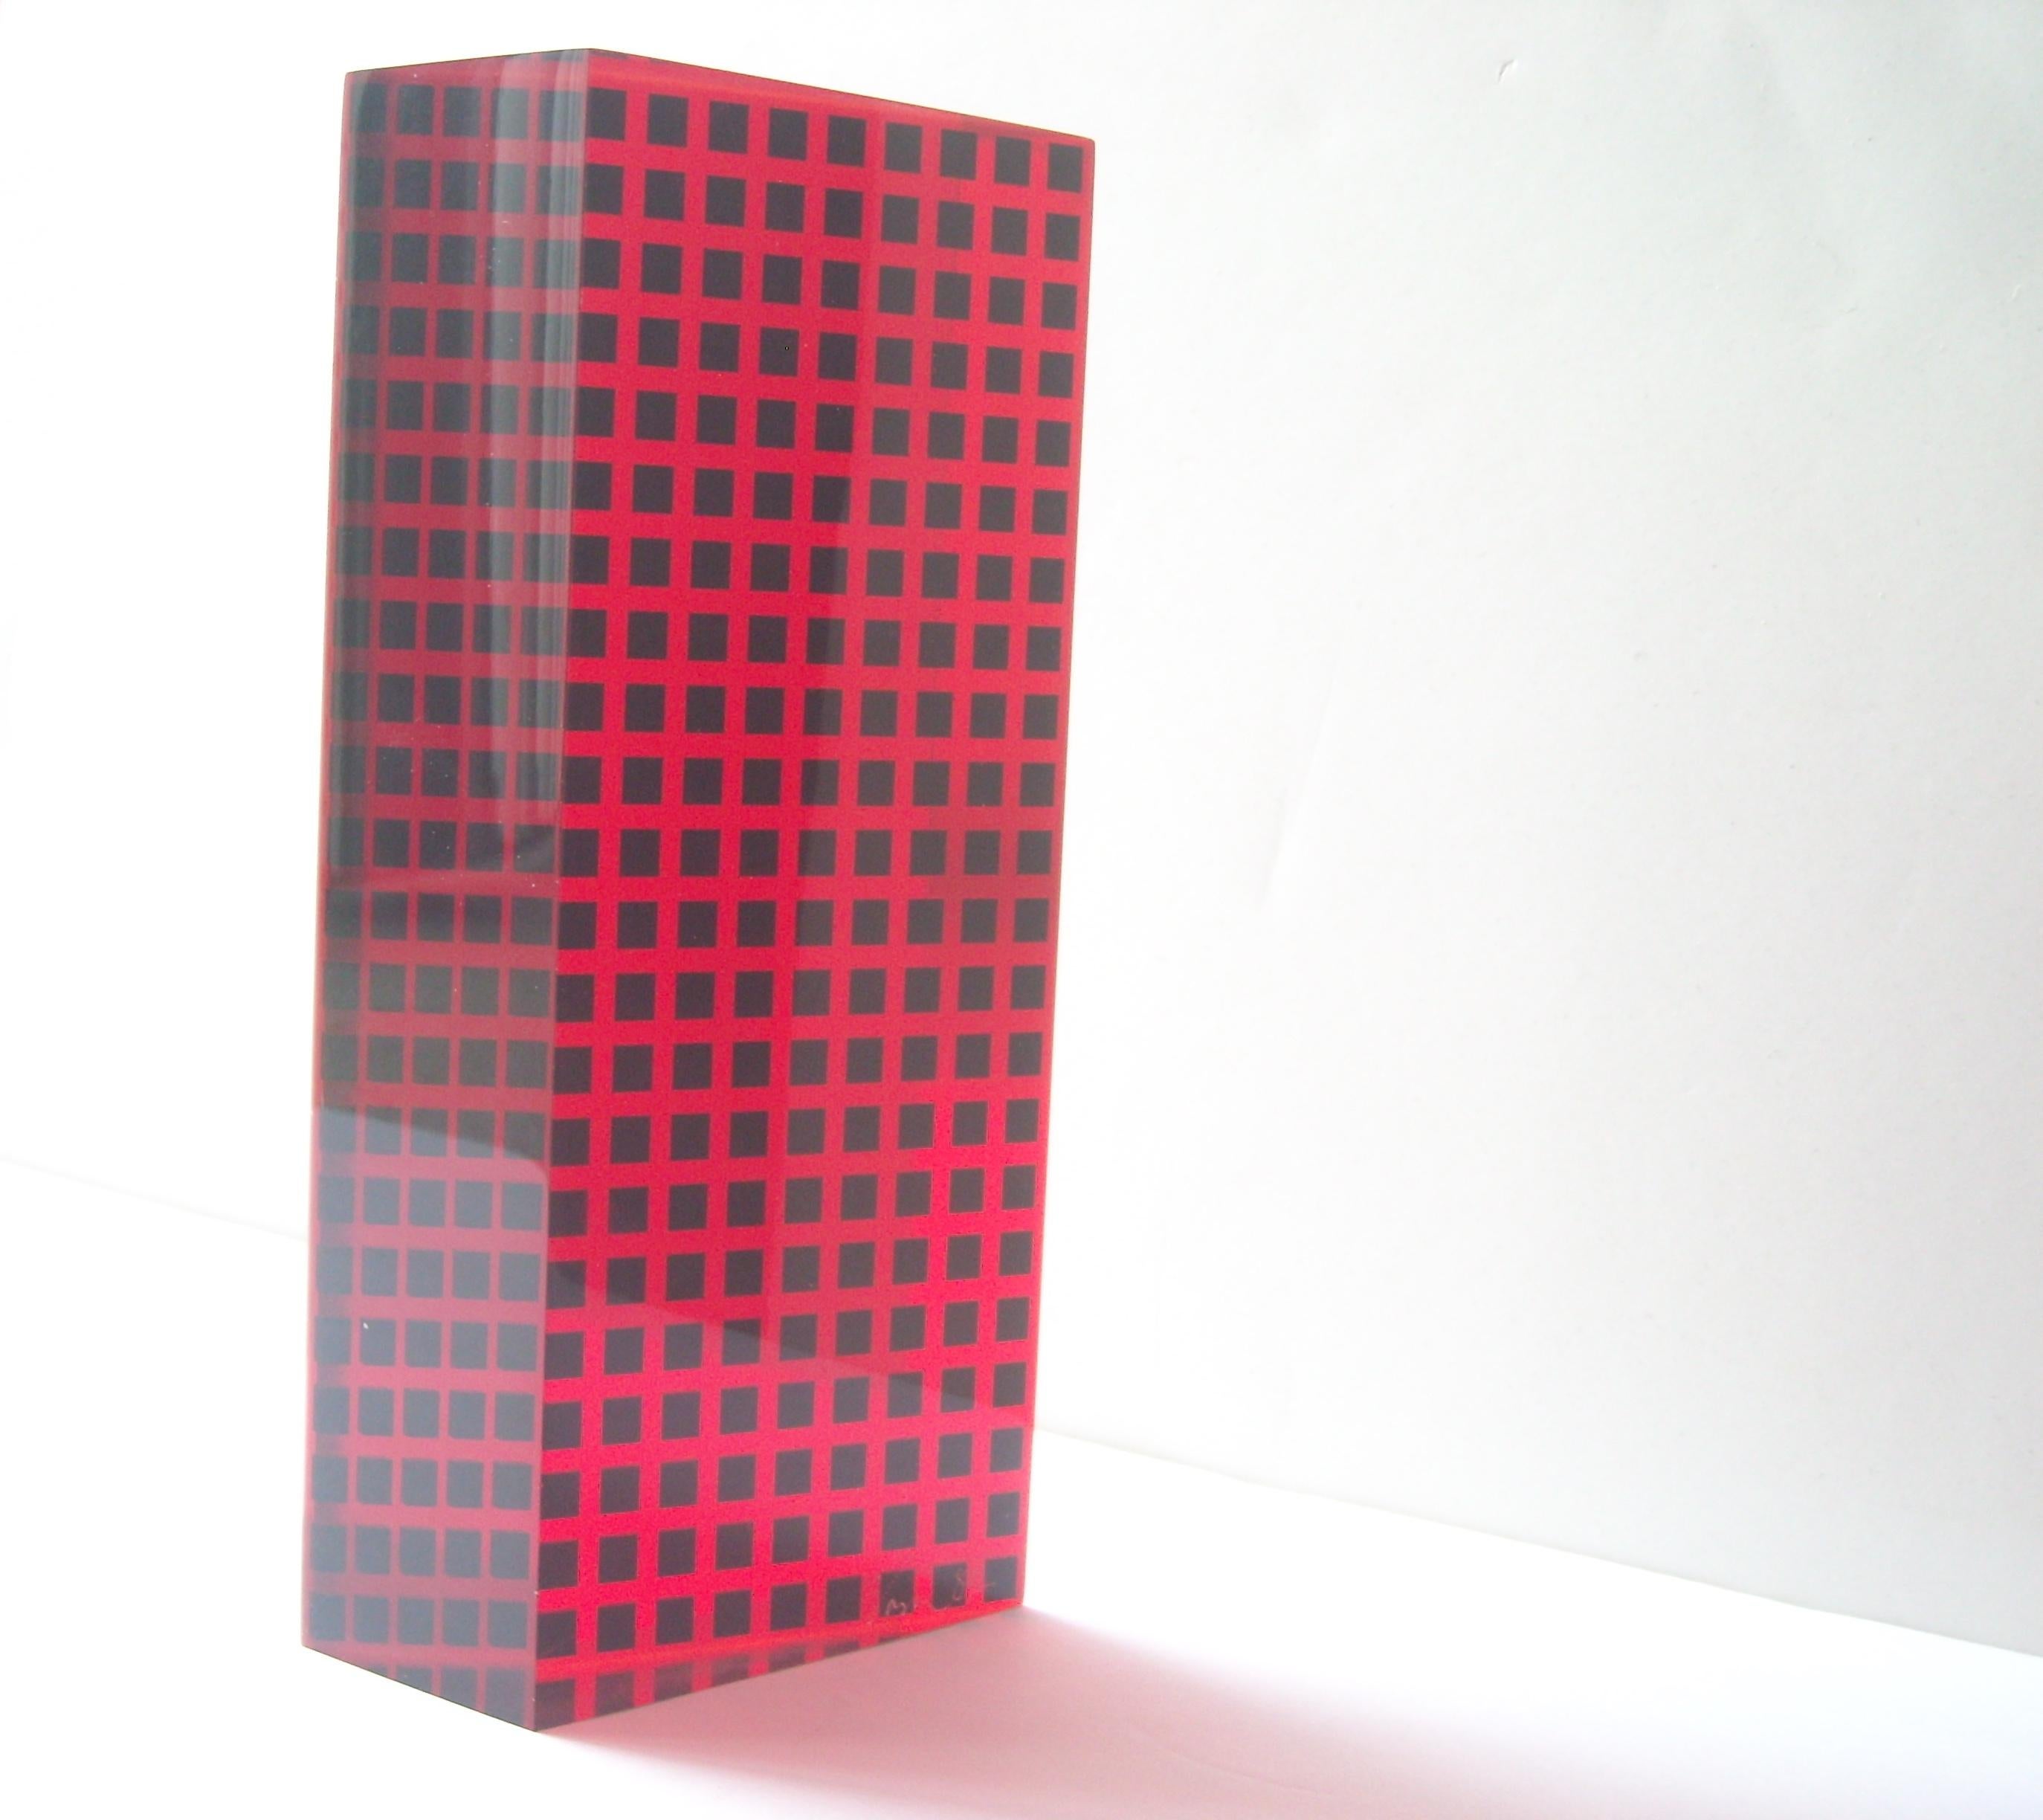 Nice geometric/abstract Vasa acrylic sculpture, signed and dated as shown.